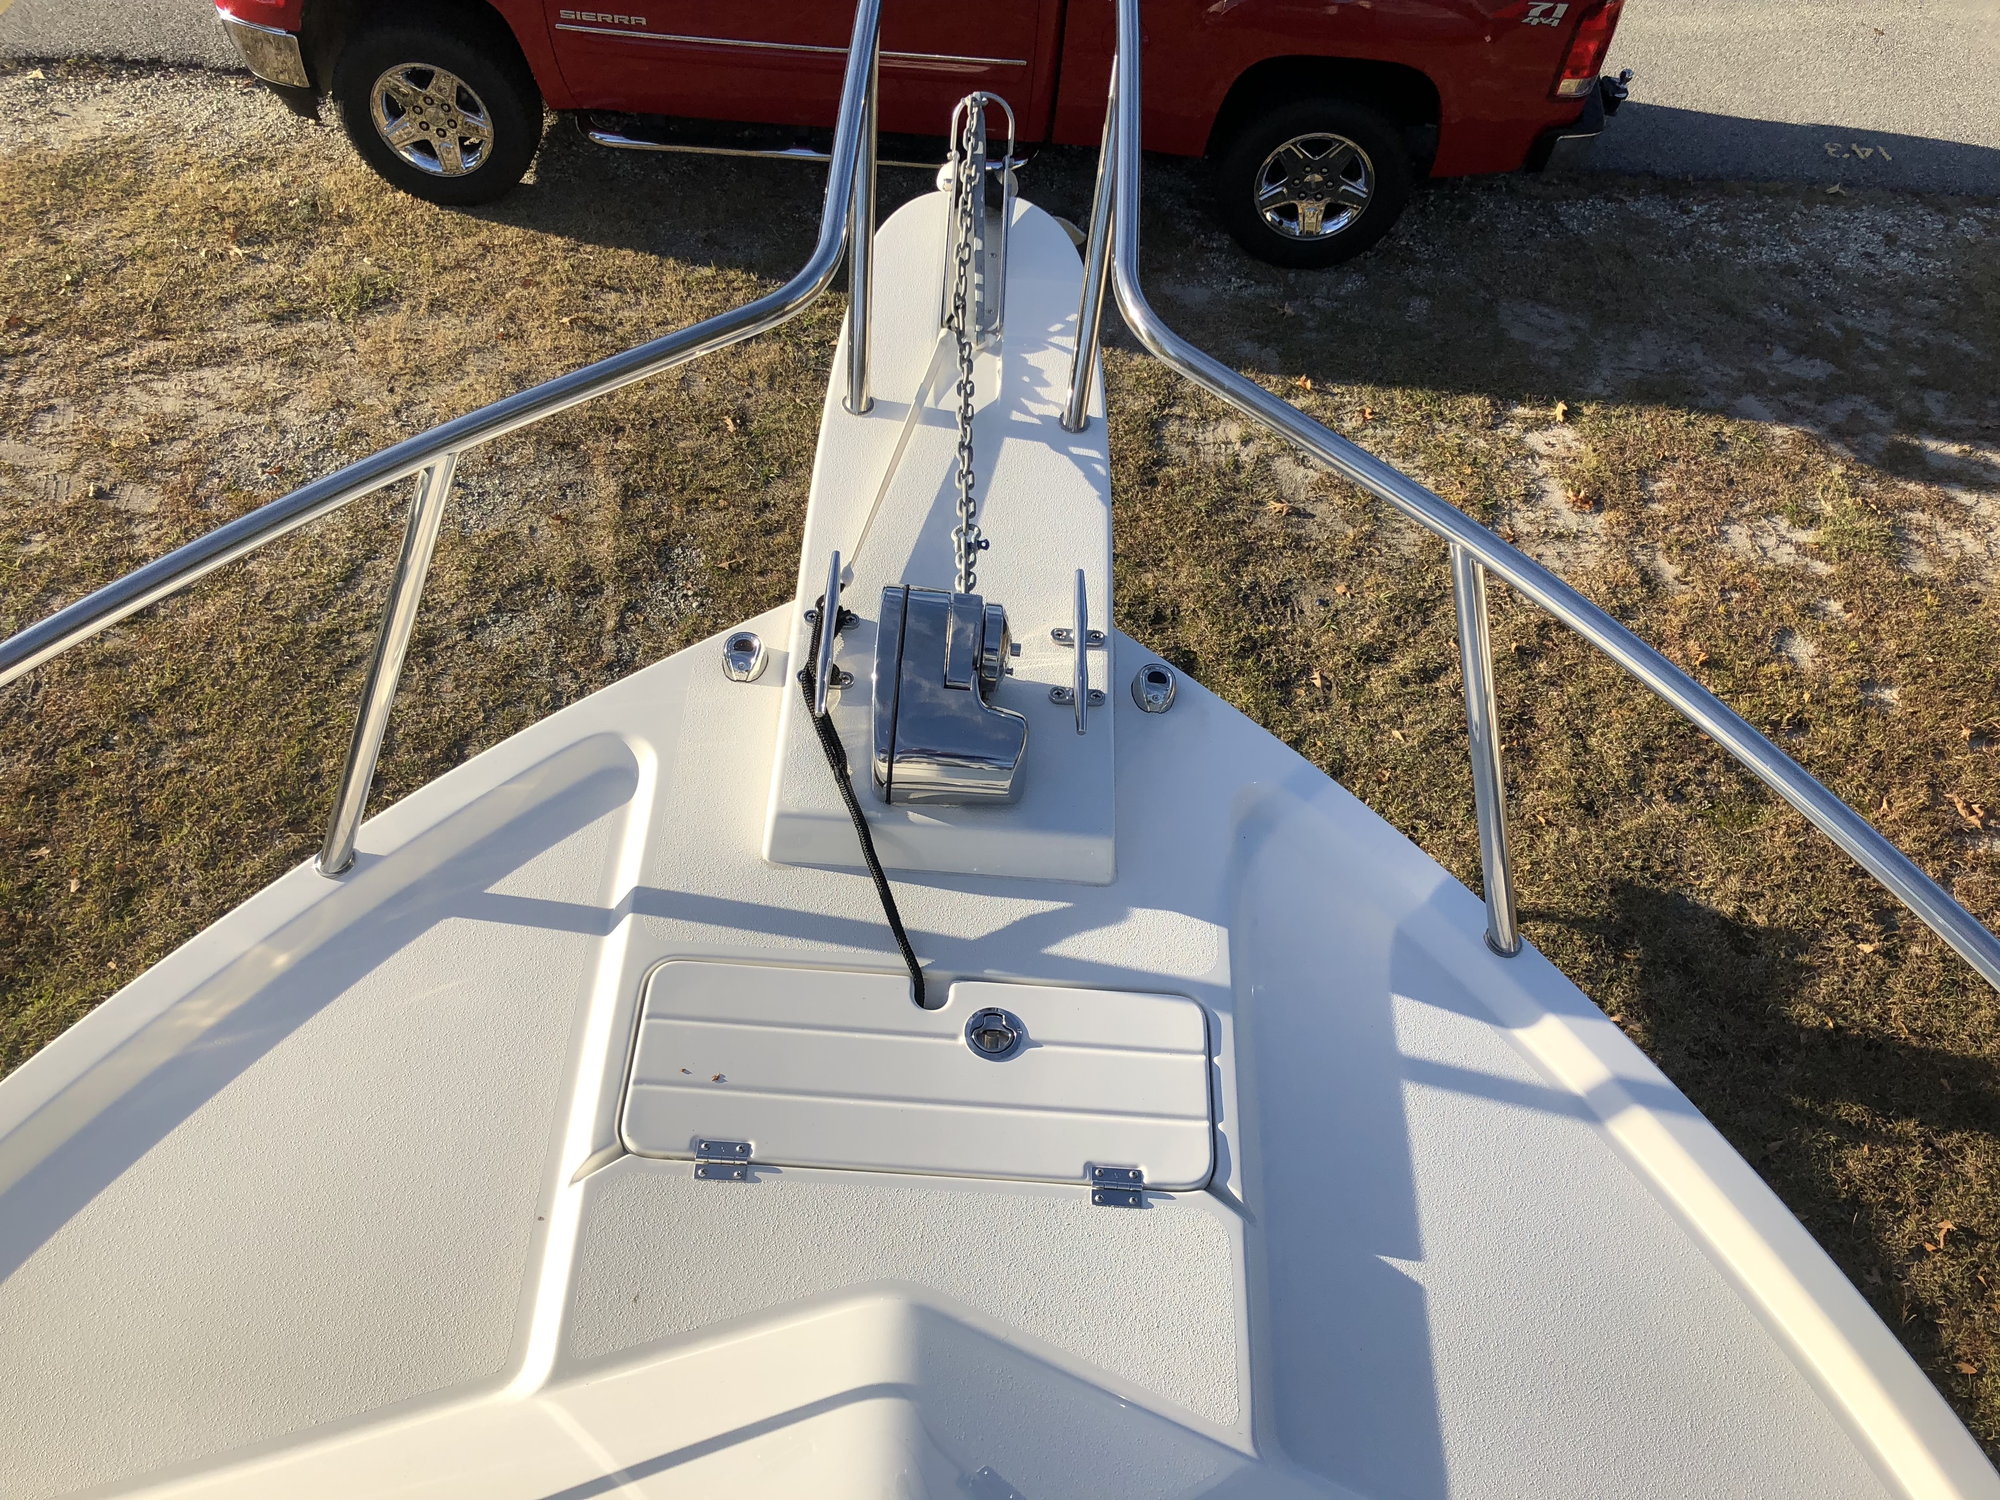 Changing recessed bow light - The Hull Truth - Boating and Fishing Forum